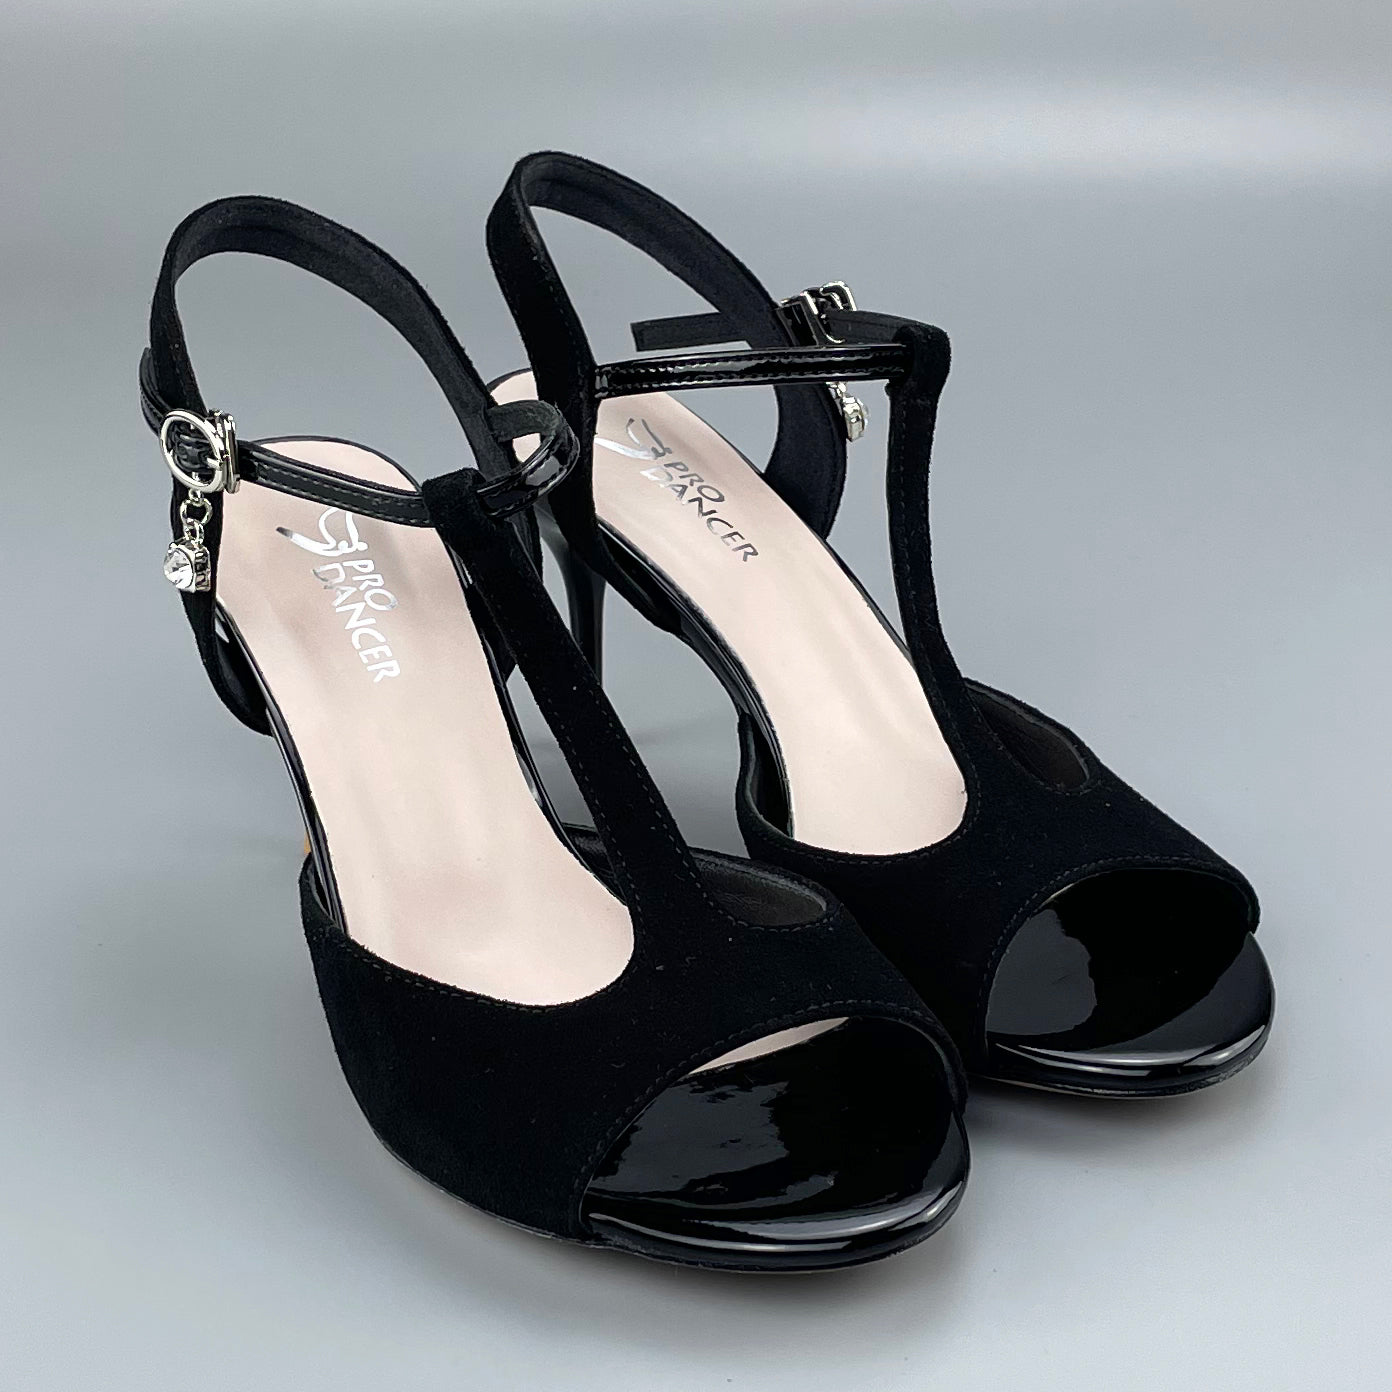 Pro Dancer Open-toe and Open-back Argentine Tango Shoes High Salsa Heels Hard Leather Sole Sandals Black (PD-9046A)